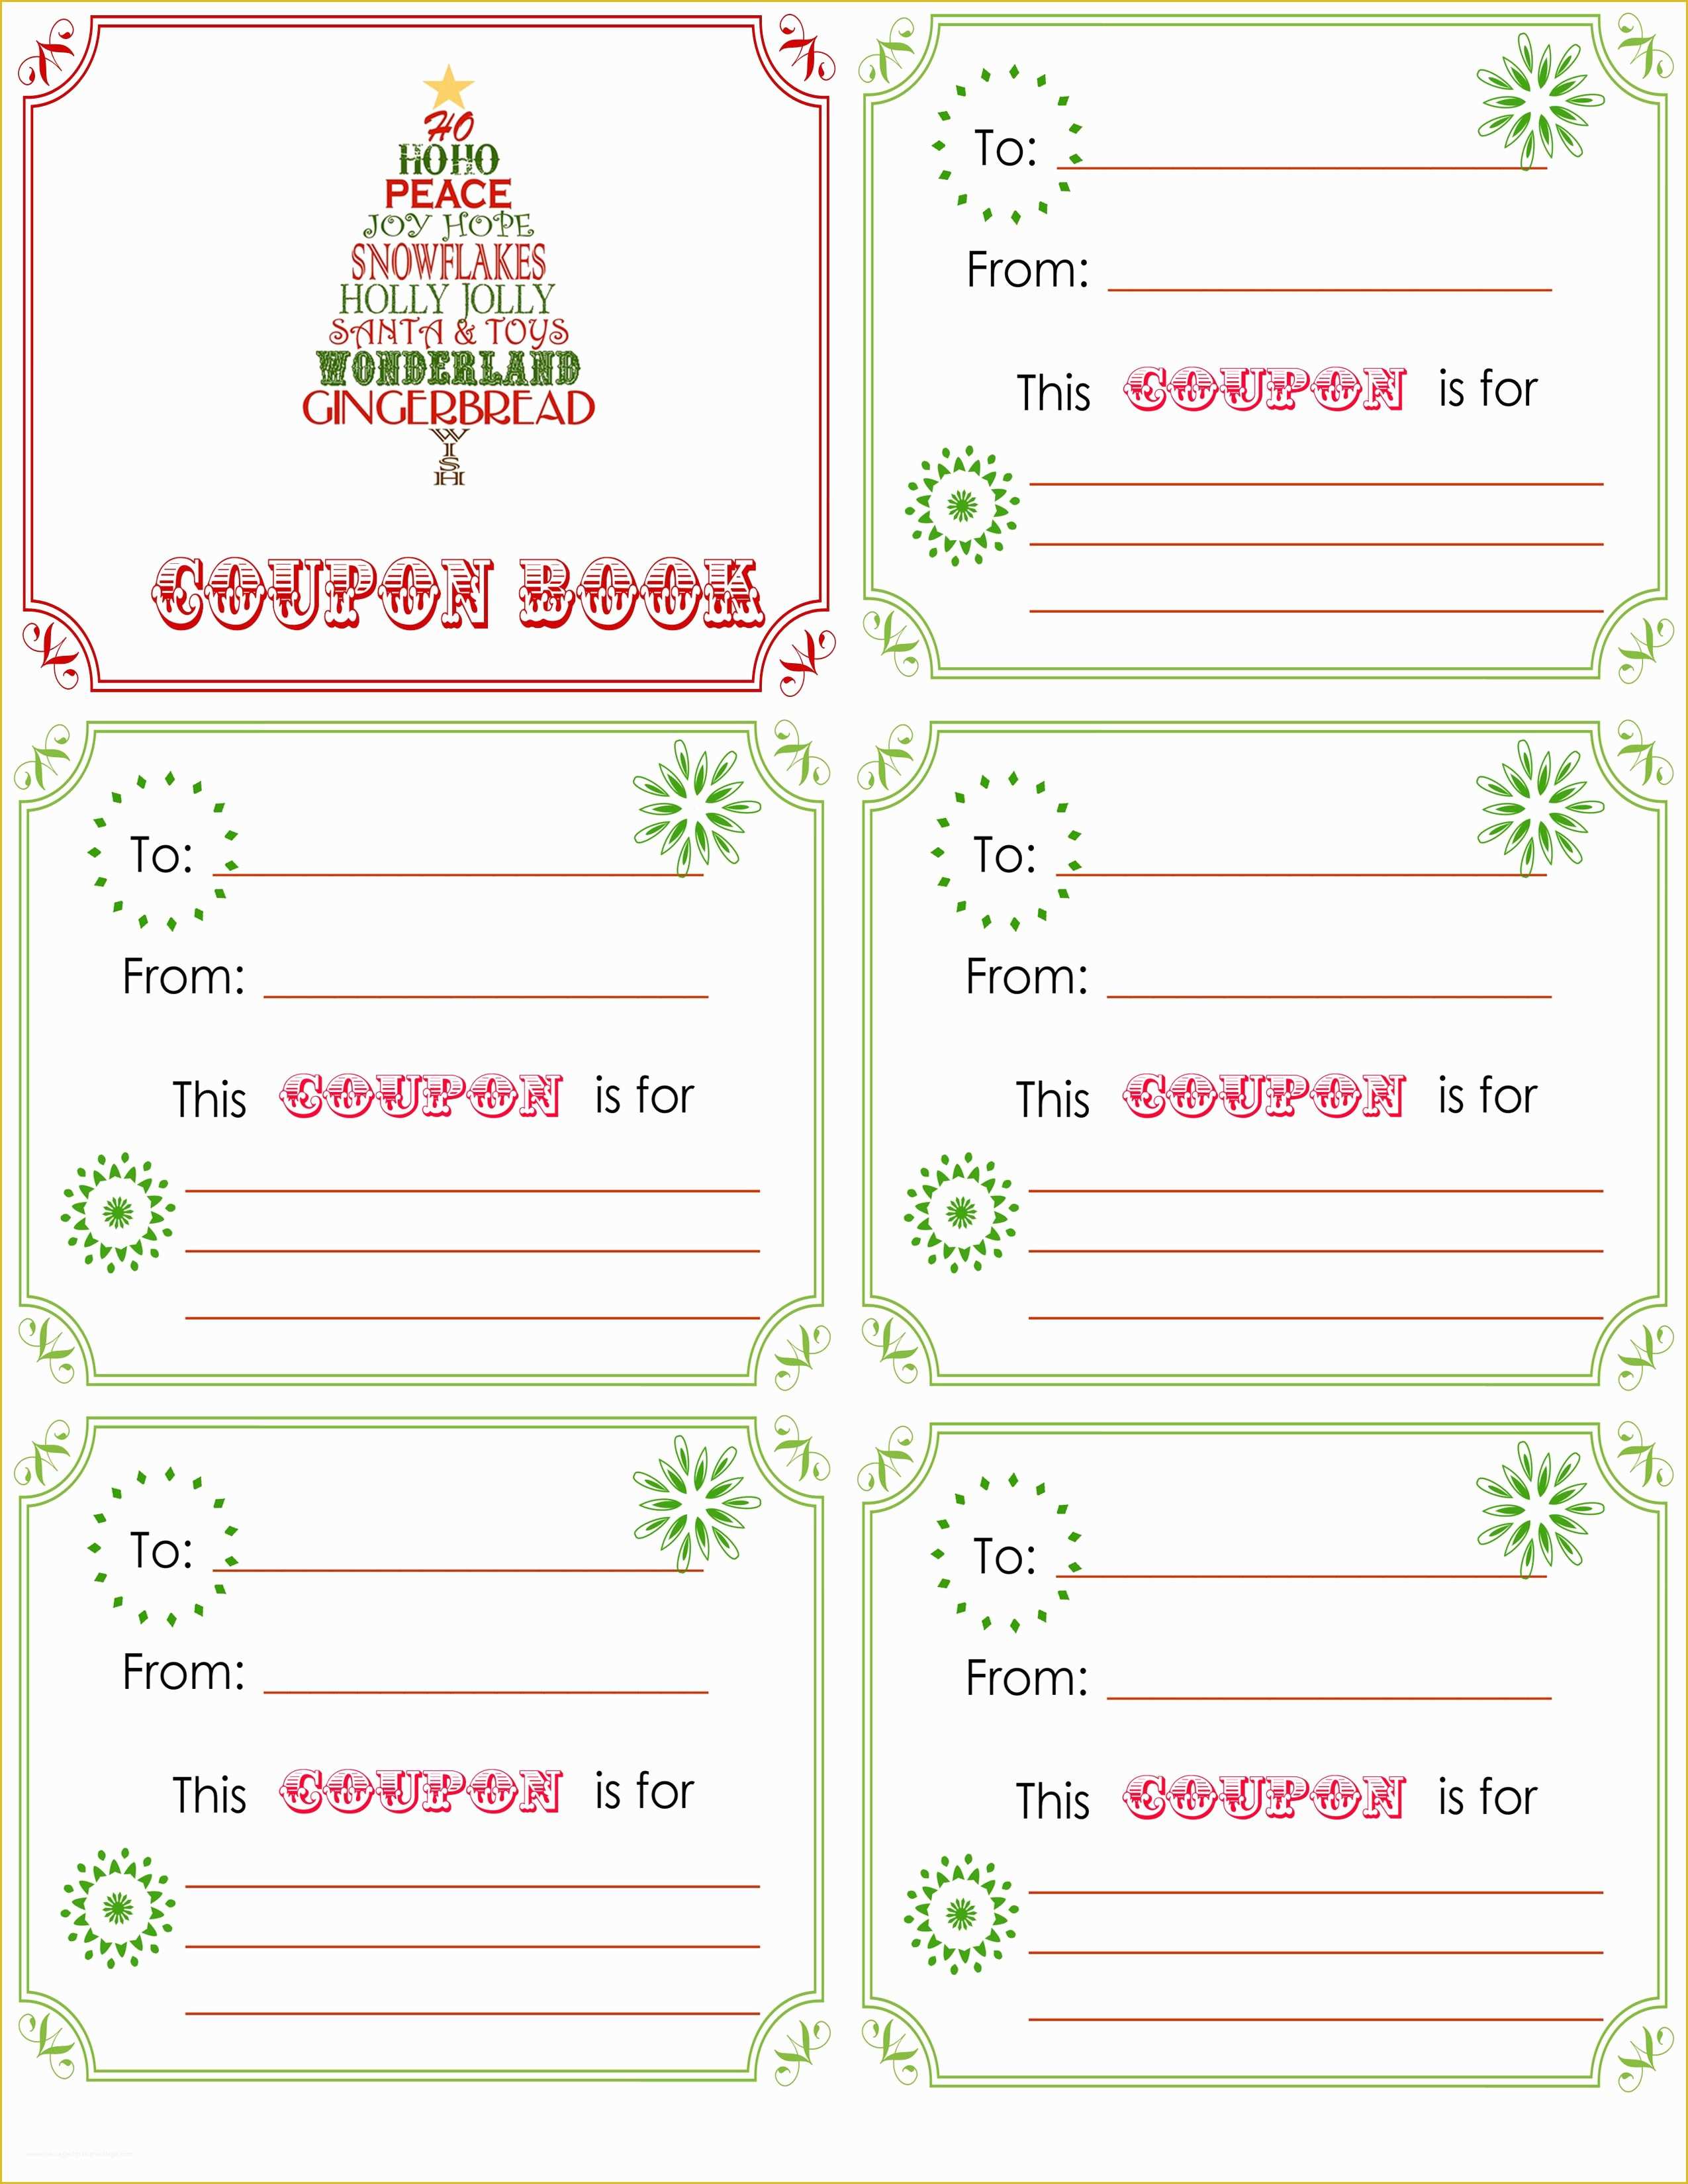 Free Coupon Template Of Printable Christmas Coupon Book L is Ting 15 Minute